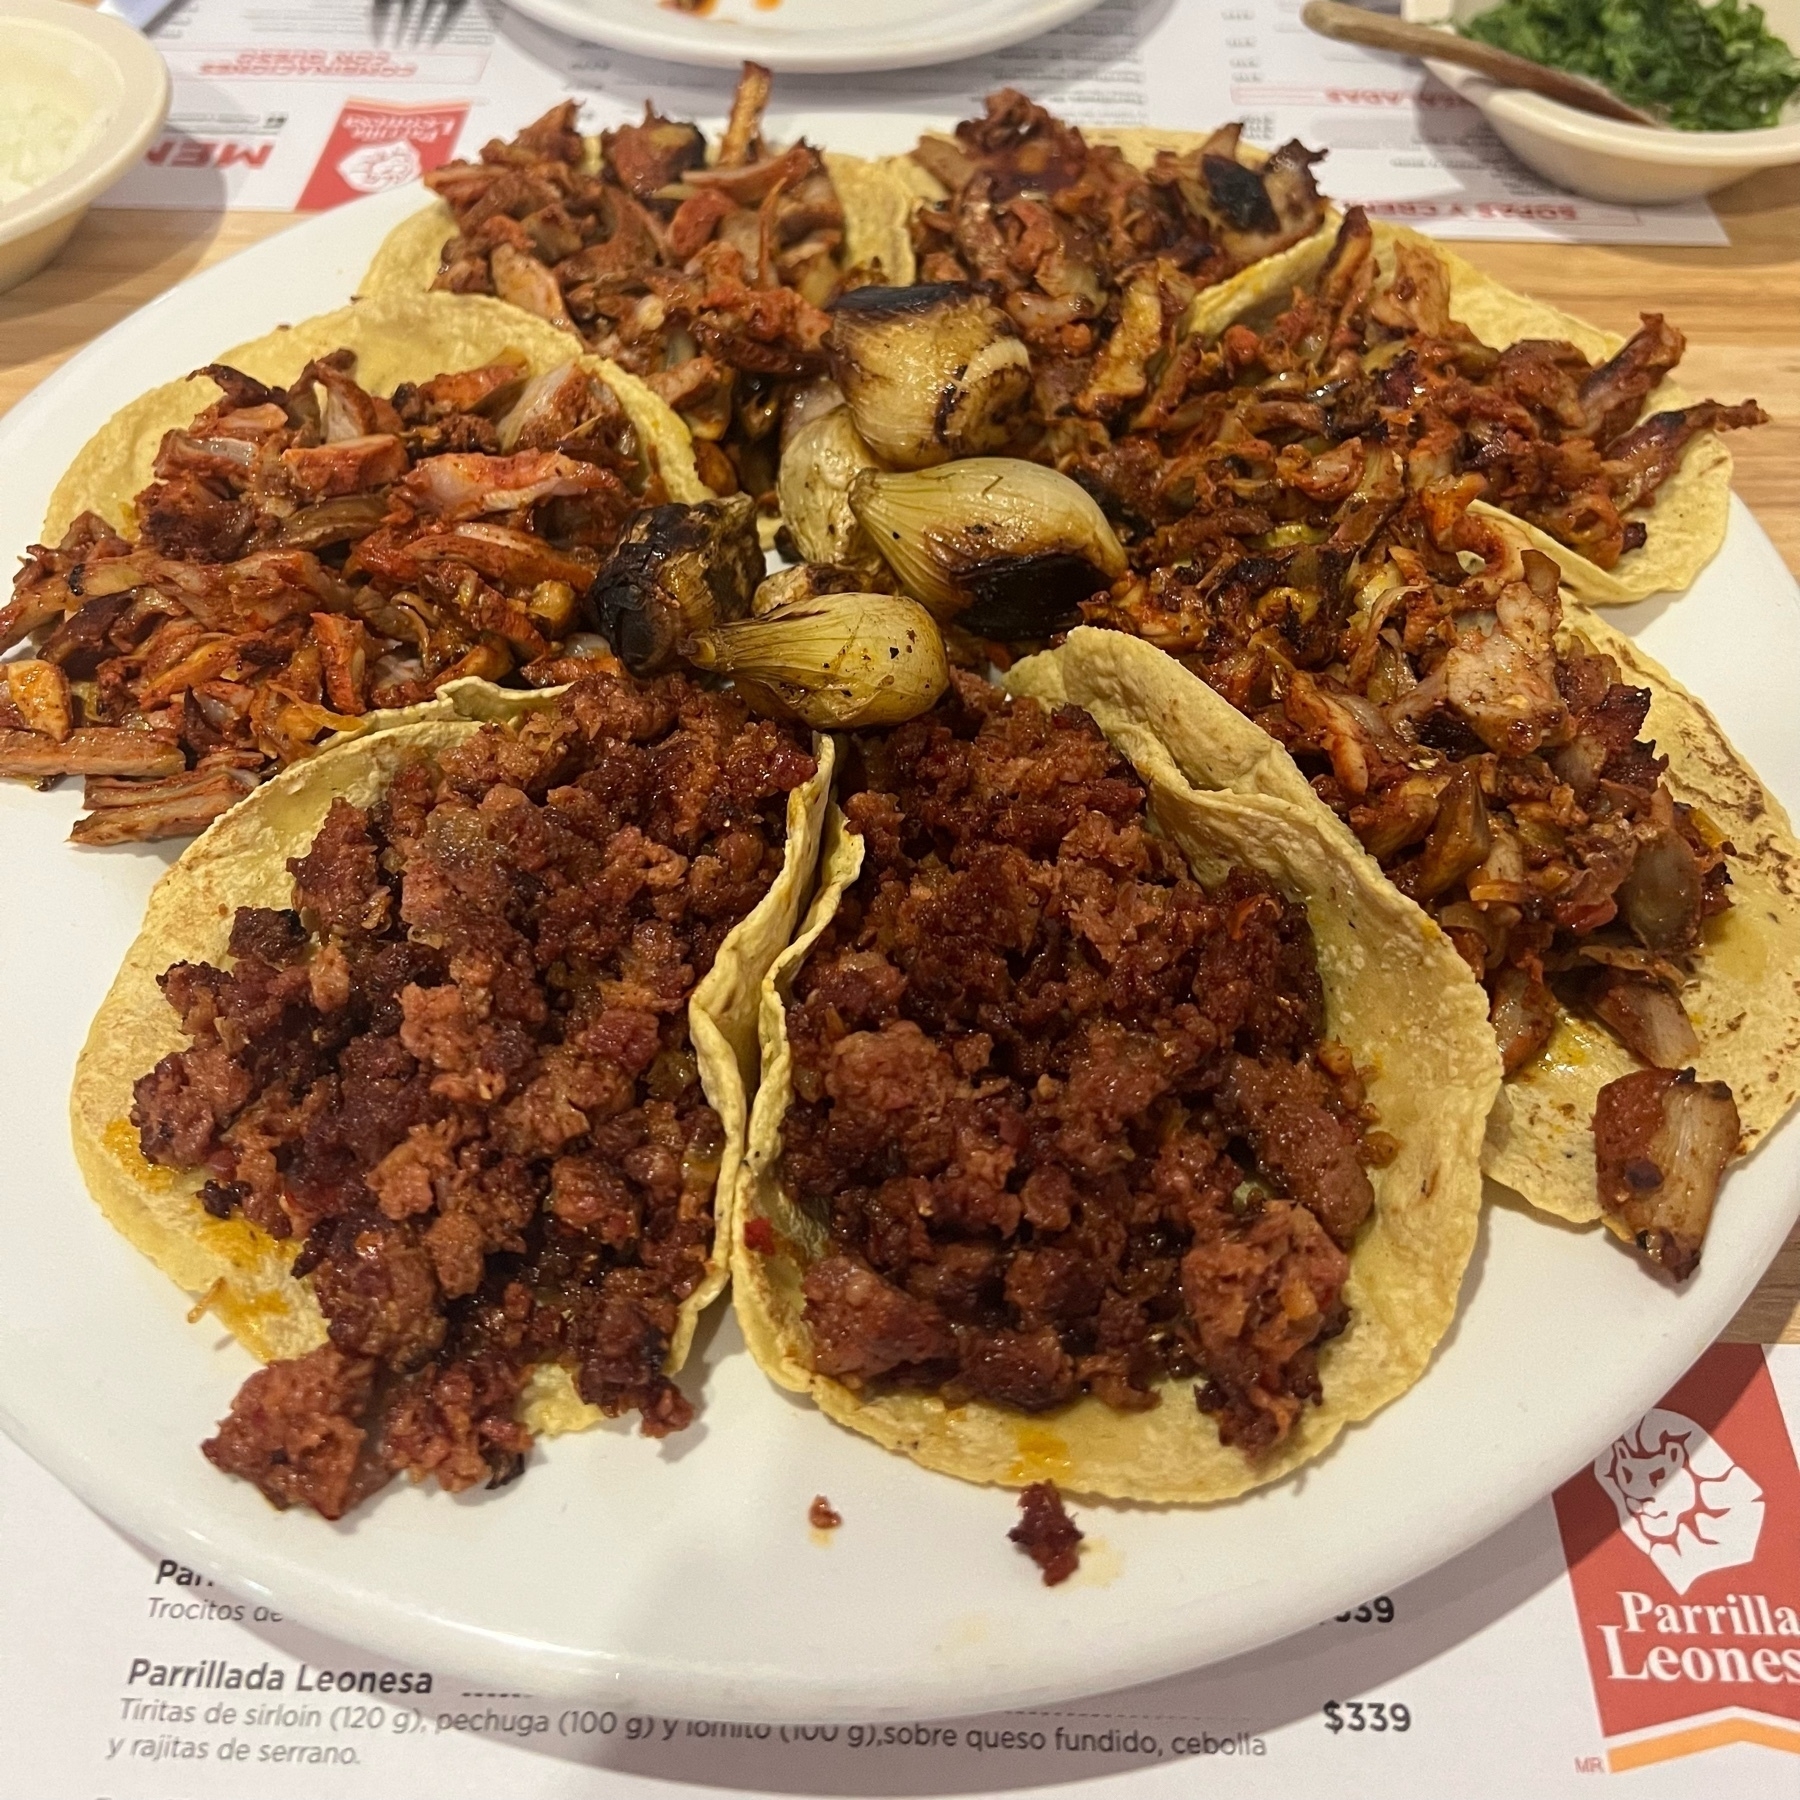 Overloaded tacos with al pastor and chorizo